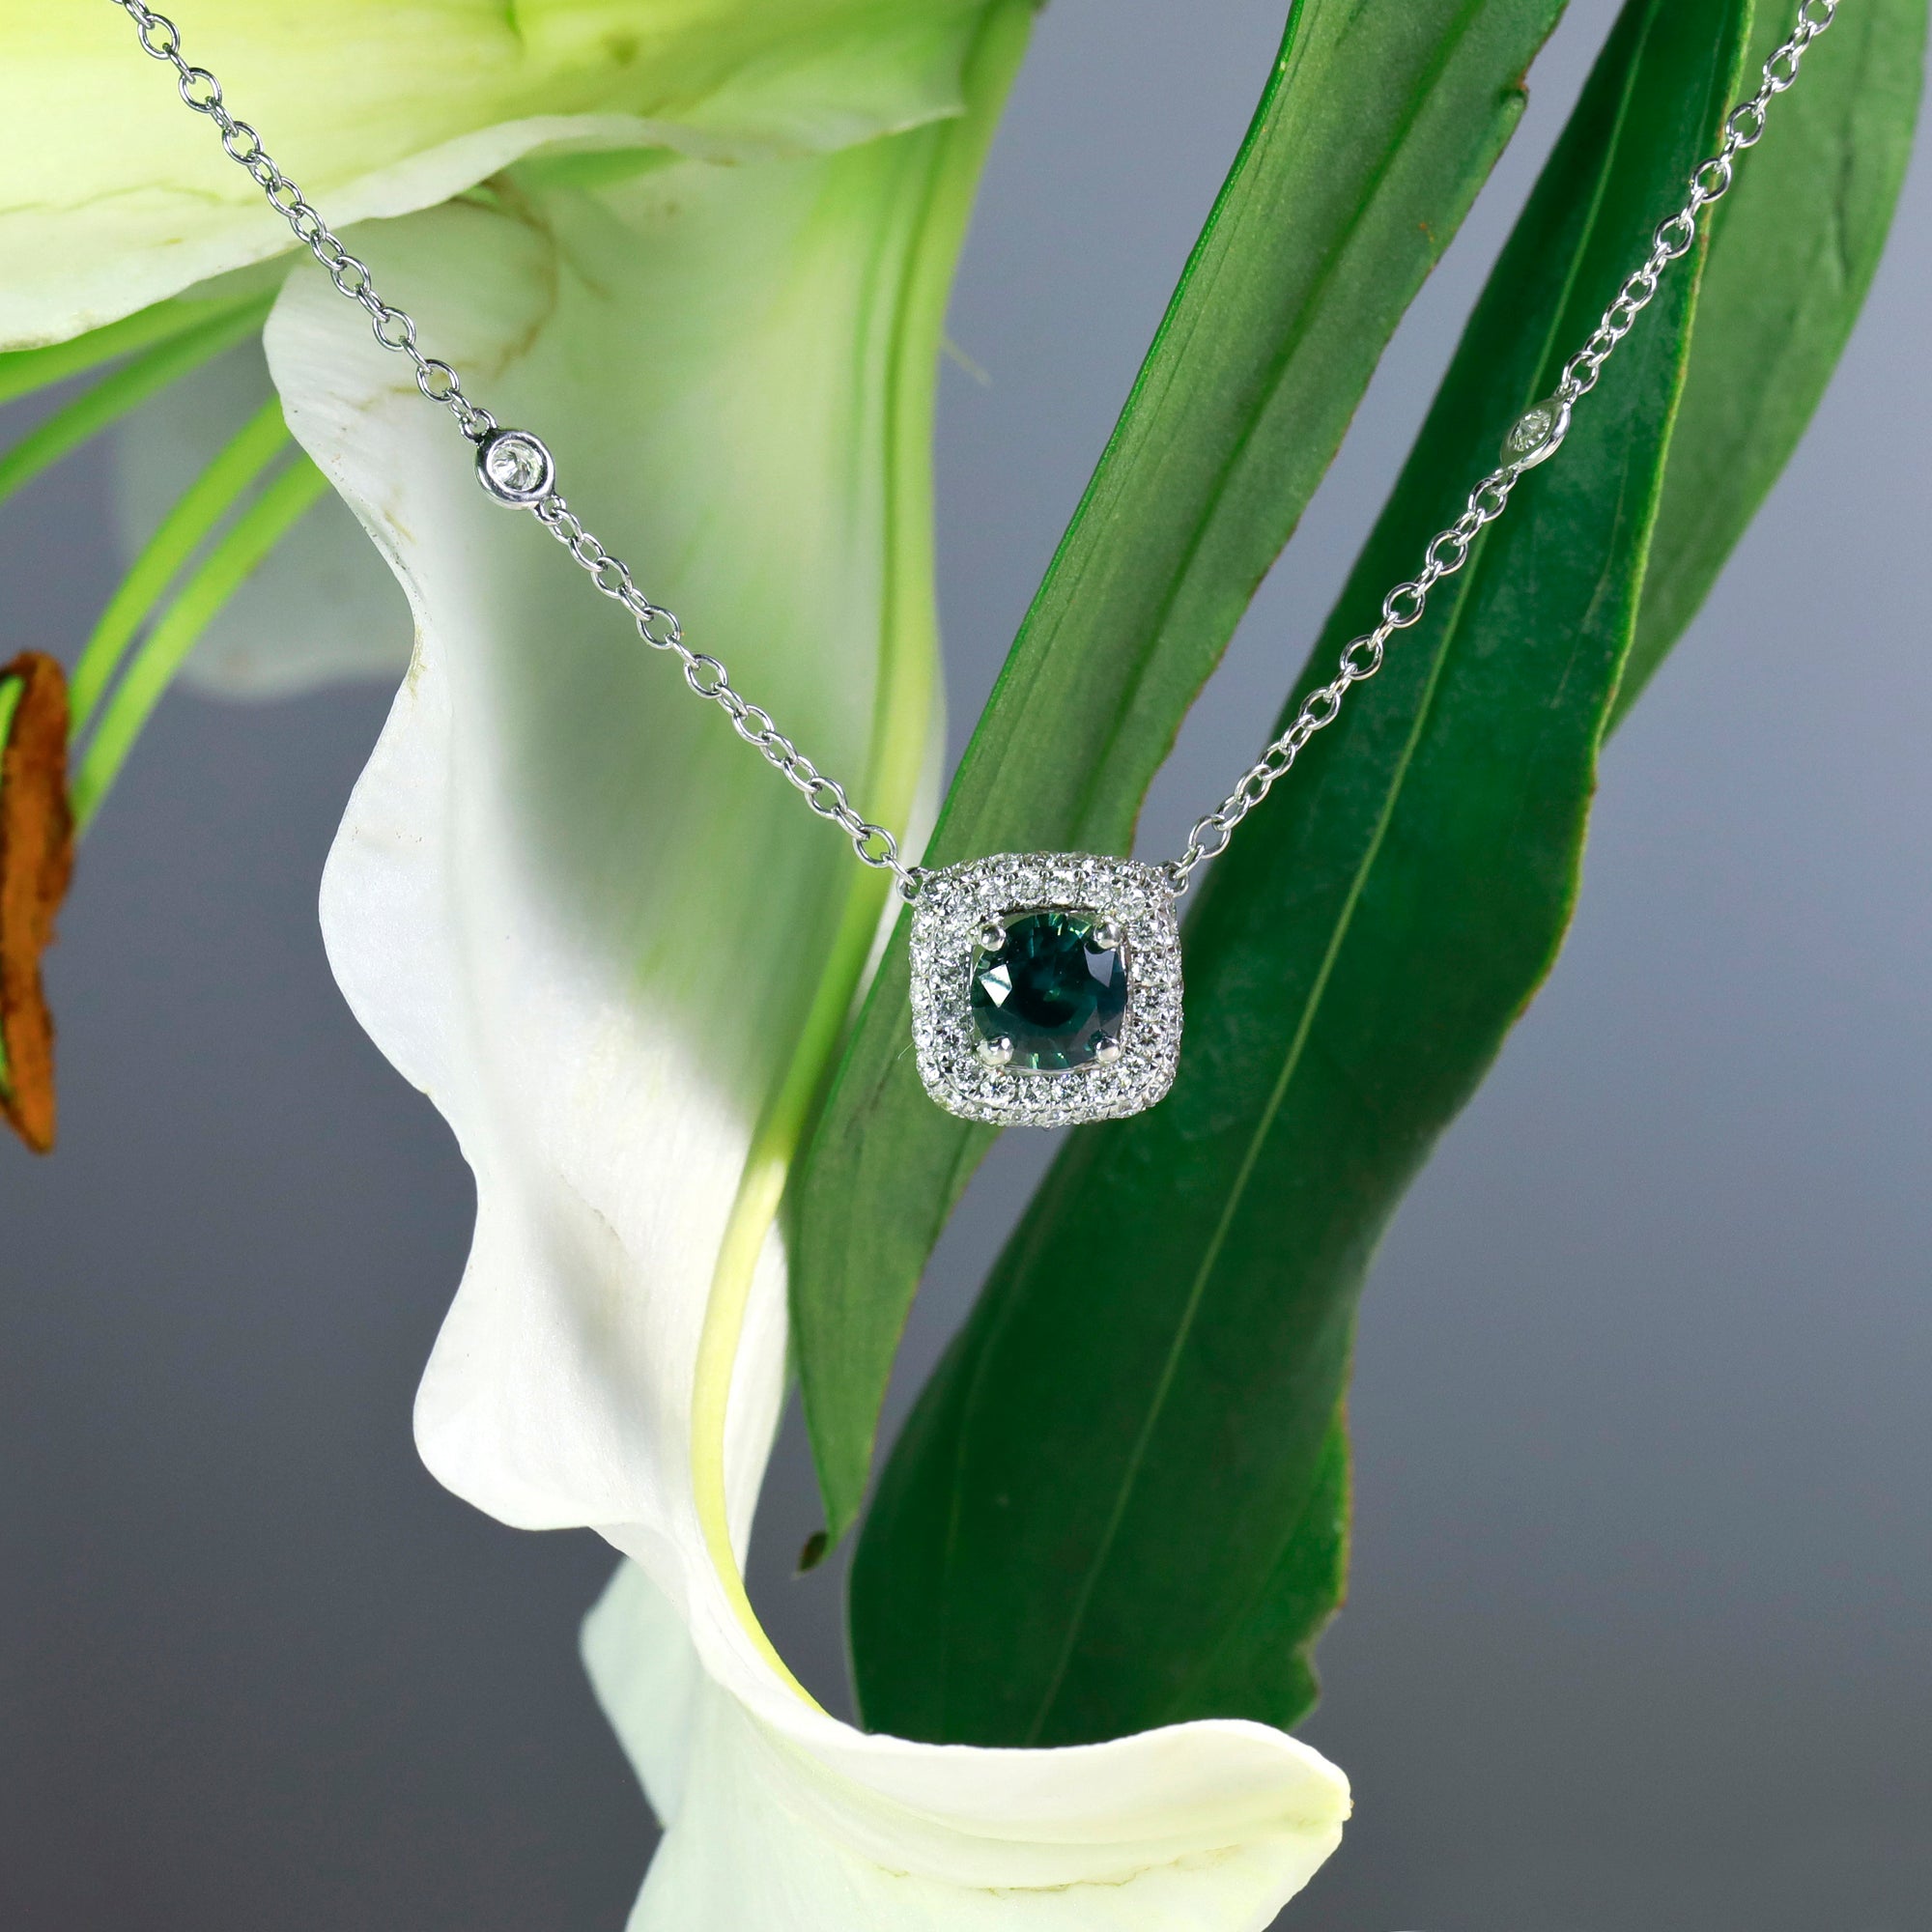 18-inch 18K white gold blue-green sapphire and diamond necklace featuring one round 1.63 carat blue-green sapphire, and round brilliant diamonds set in a cushion shaped halo and 8 bezel-set diamonds set along the chain. 